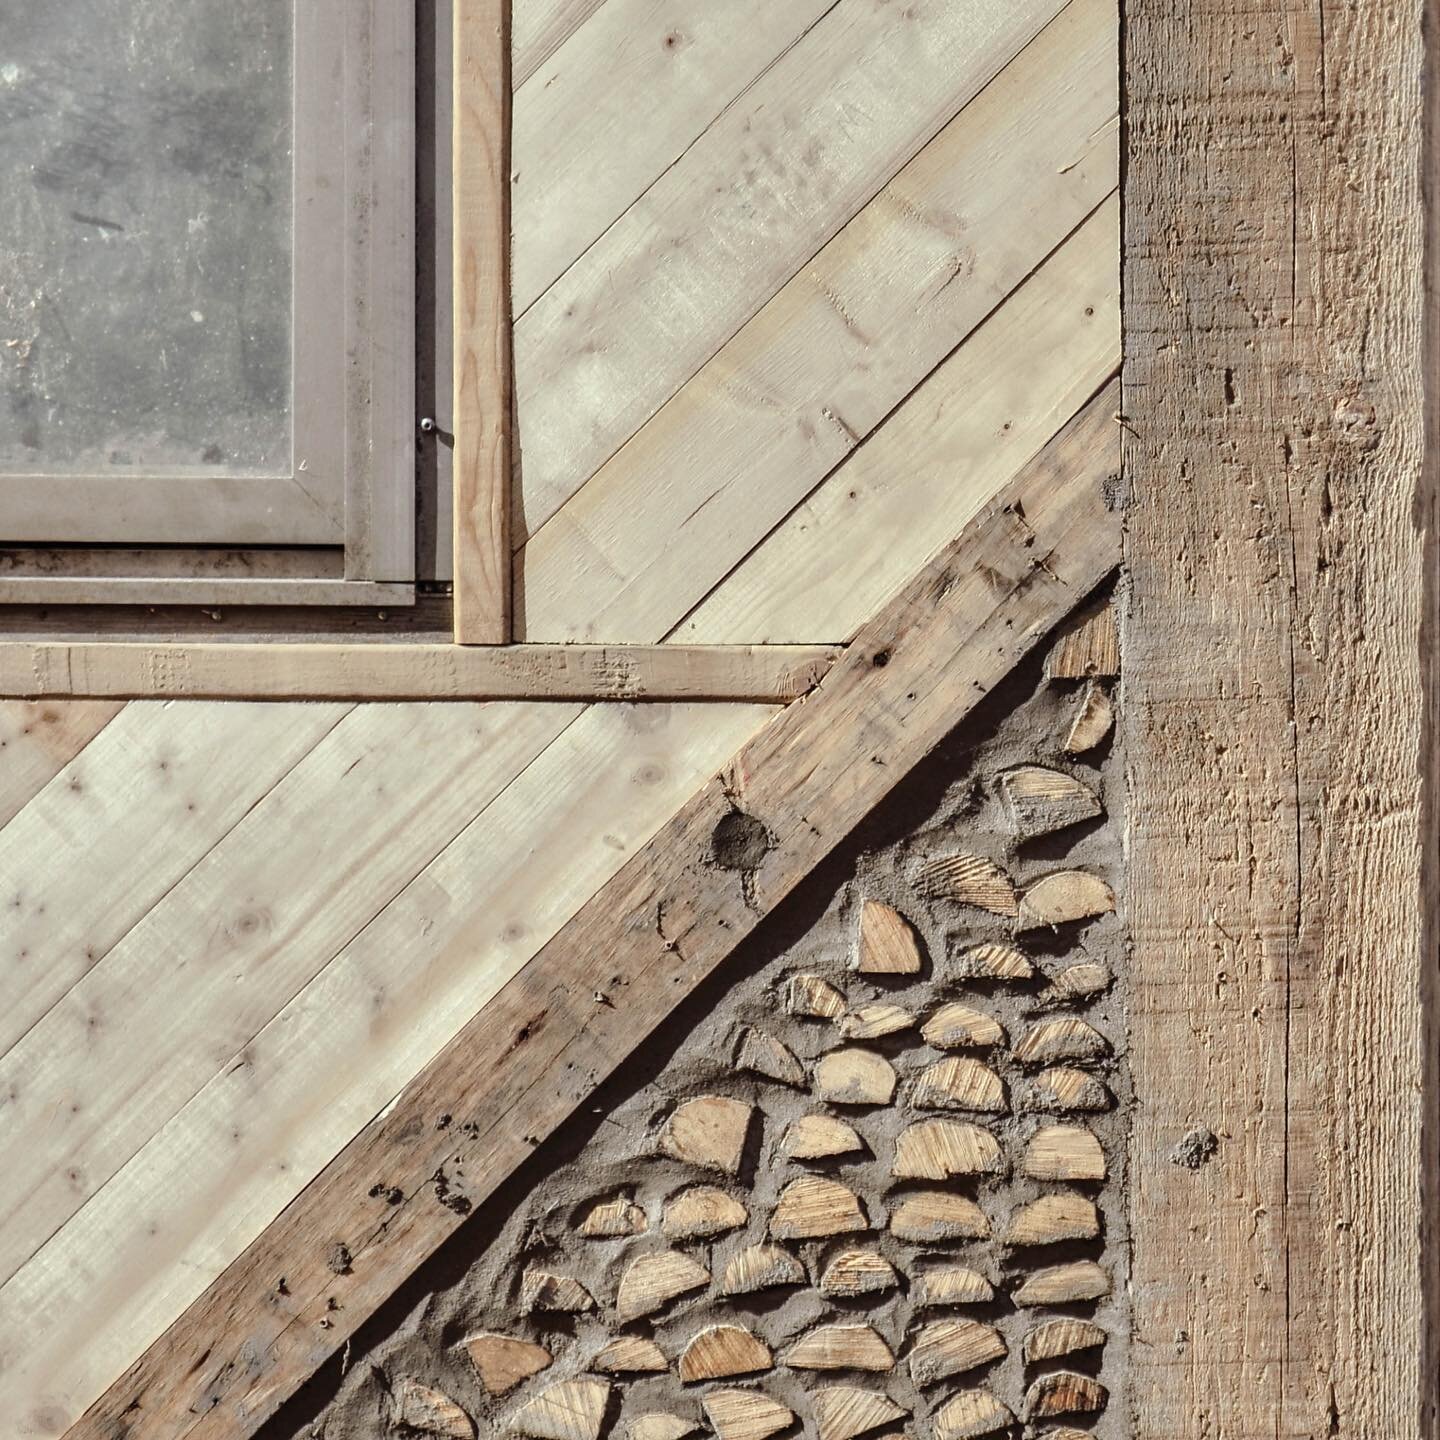 Design and build with compressed cordwood 2017
&Ouml;stert&auml;lje, Sweden 
Organised by @aes_studio 

#eartharchitecture #clayarchitecture  #naturalmaterials #bioconstruction #cordwood #wooddesign 

 #sustainability #ecofriendly #design #greenarchi